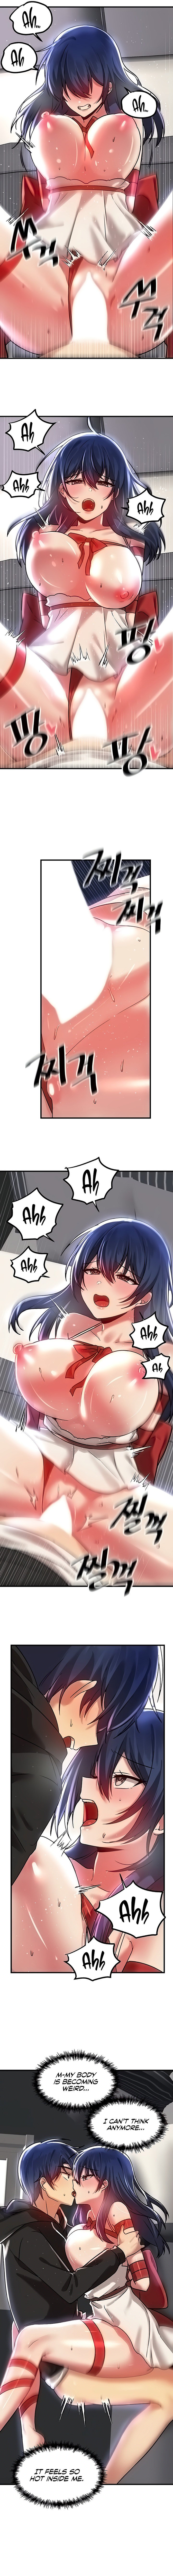 trapped-in-the-academys-eroge-chap-70-9